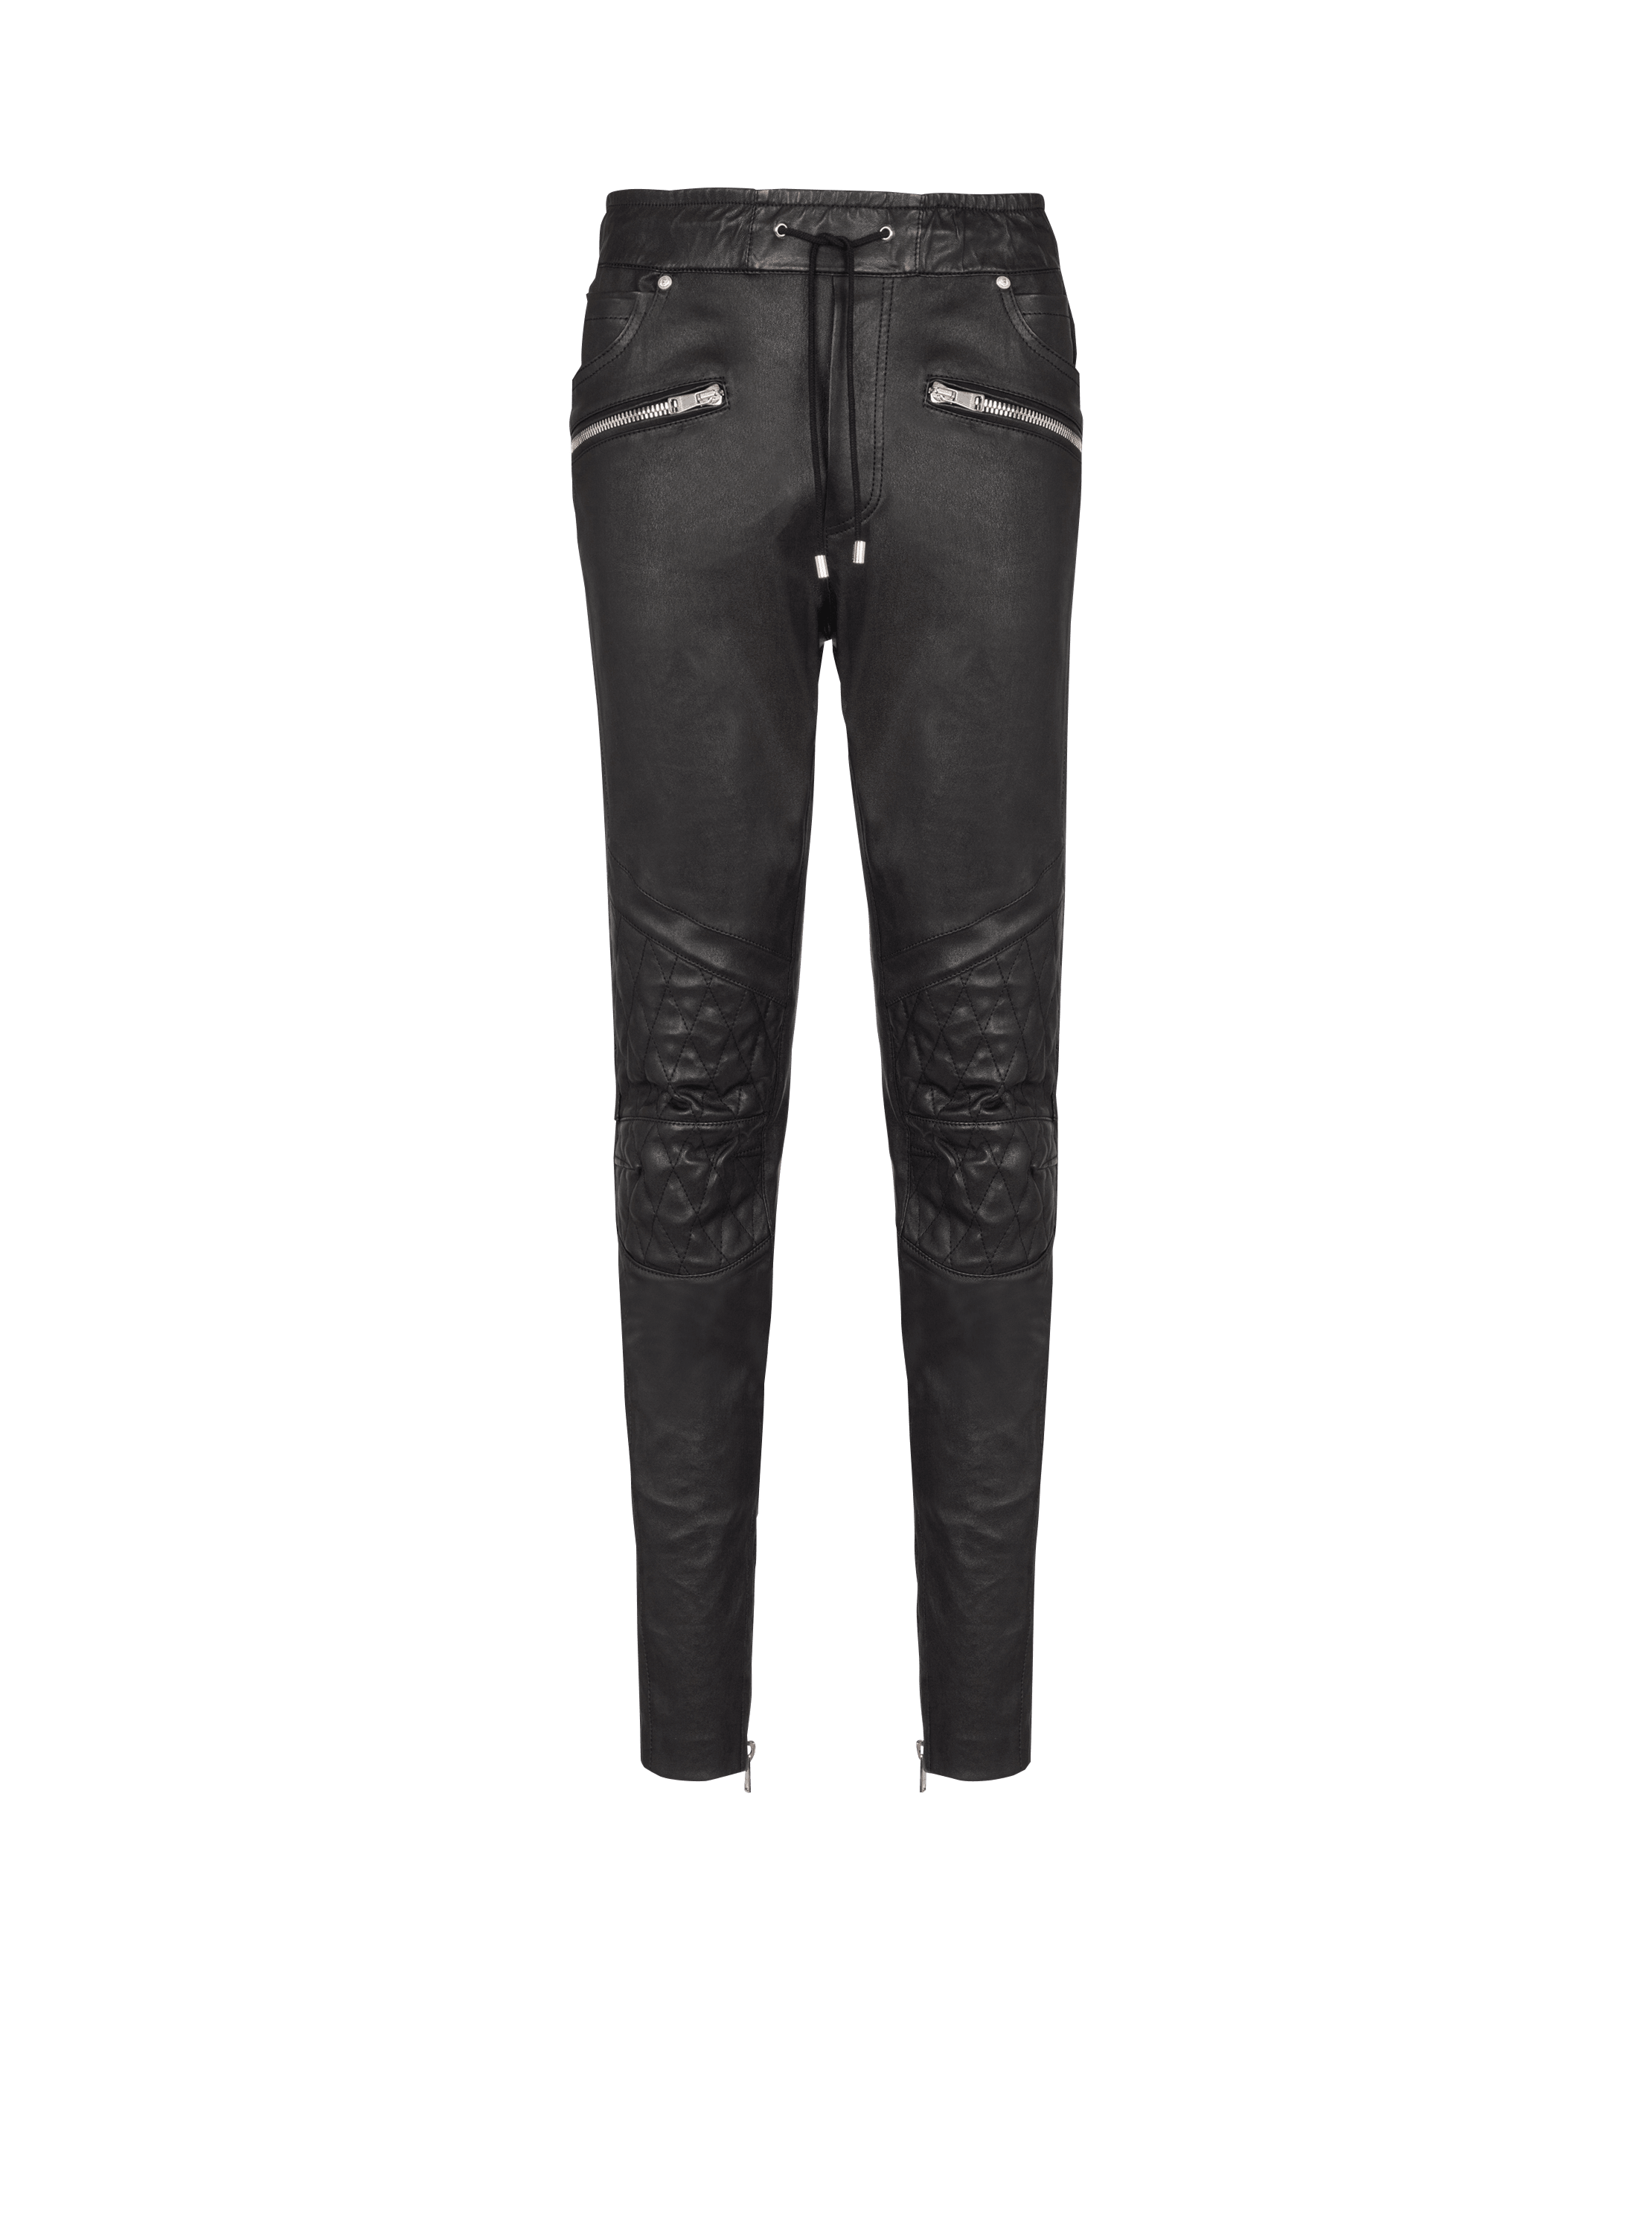 Balmain: Black Belted Leather Trousers